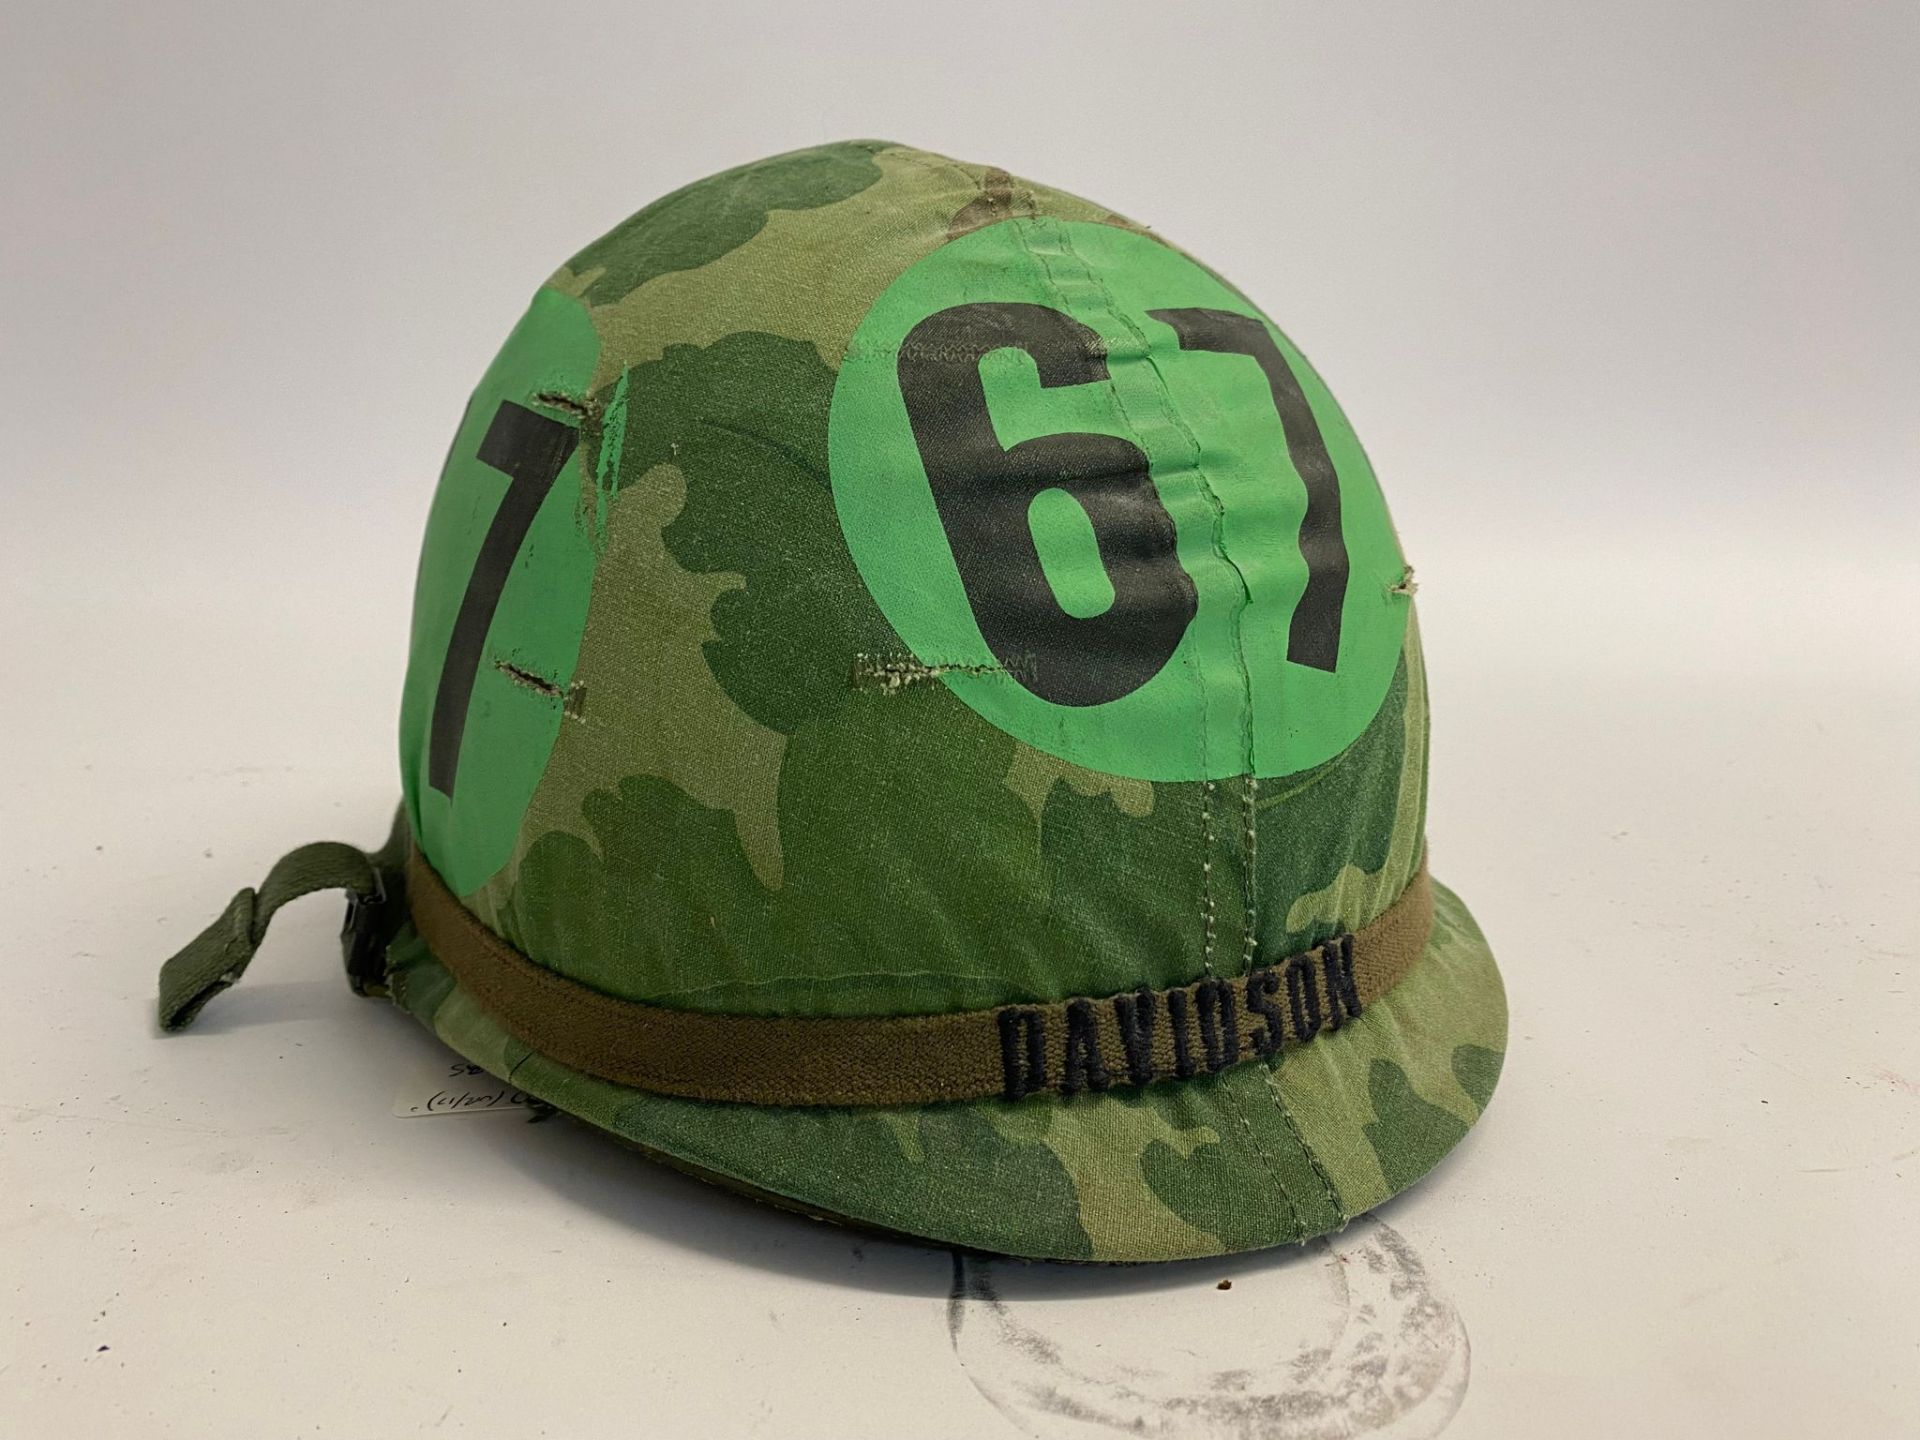 A US M1 airborne training helmet with embroidered band bearing the name Davidson.